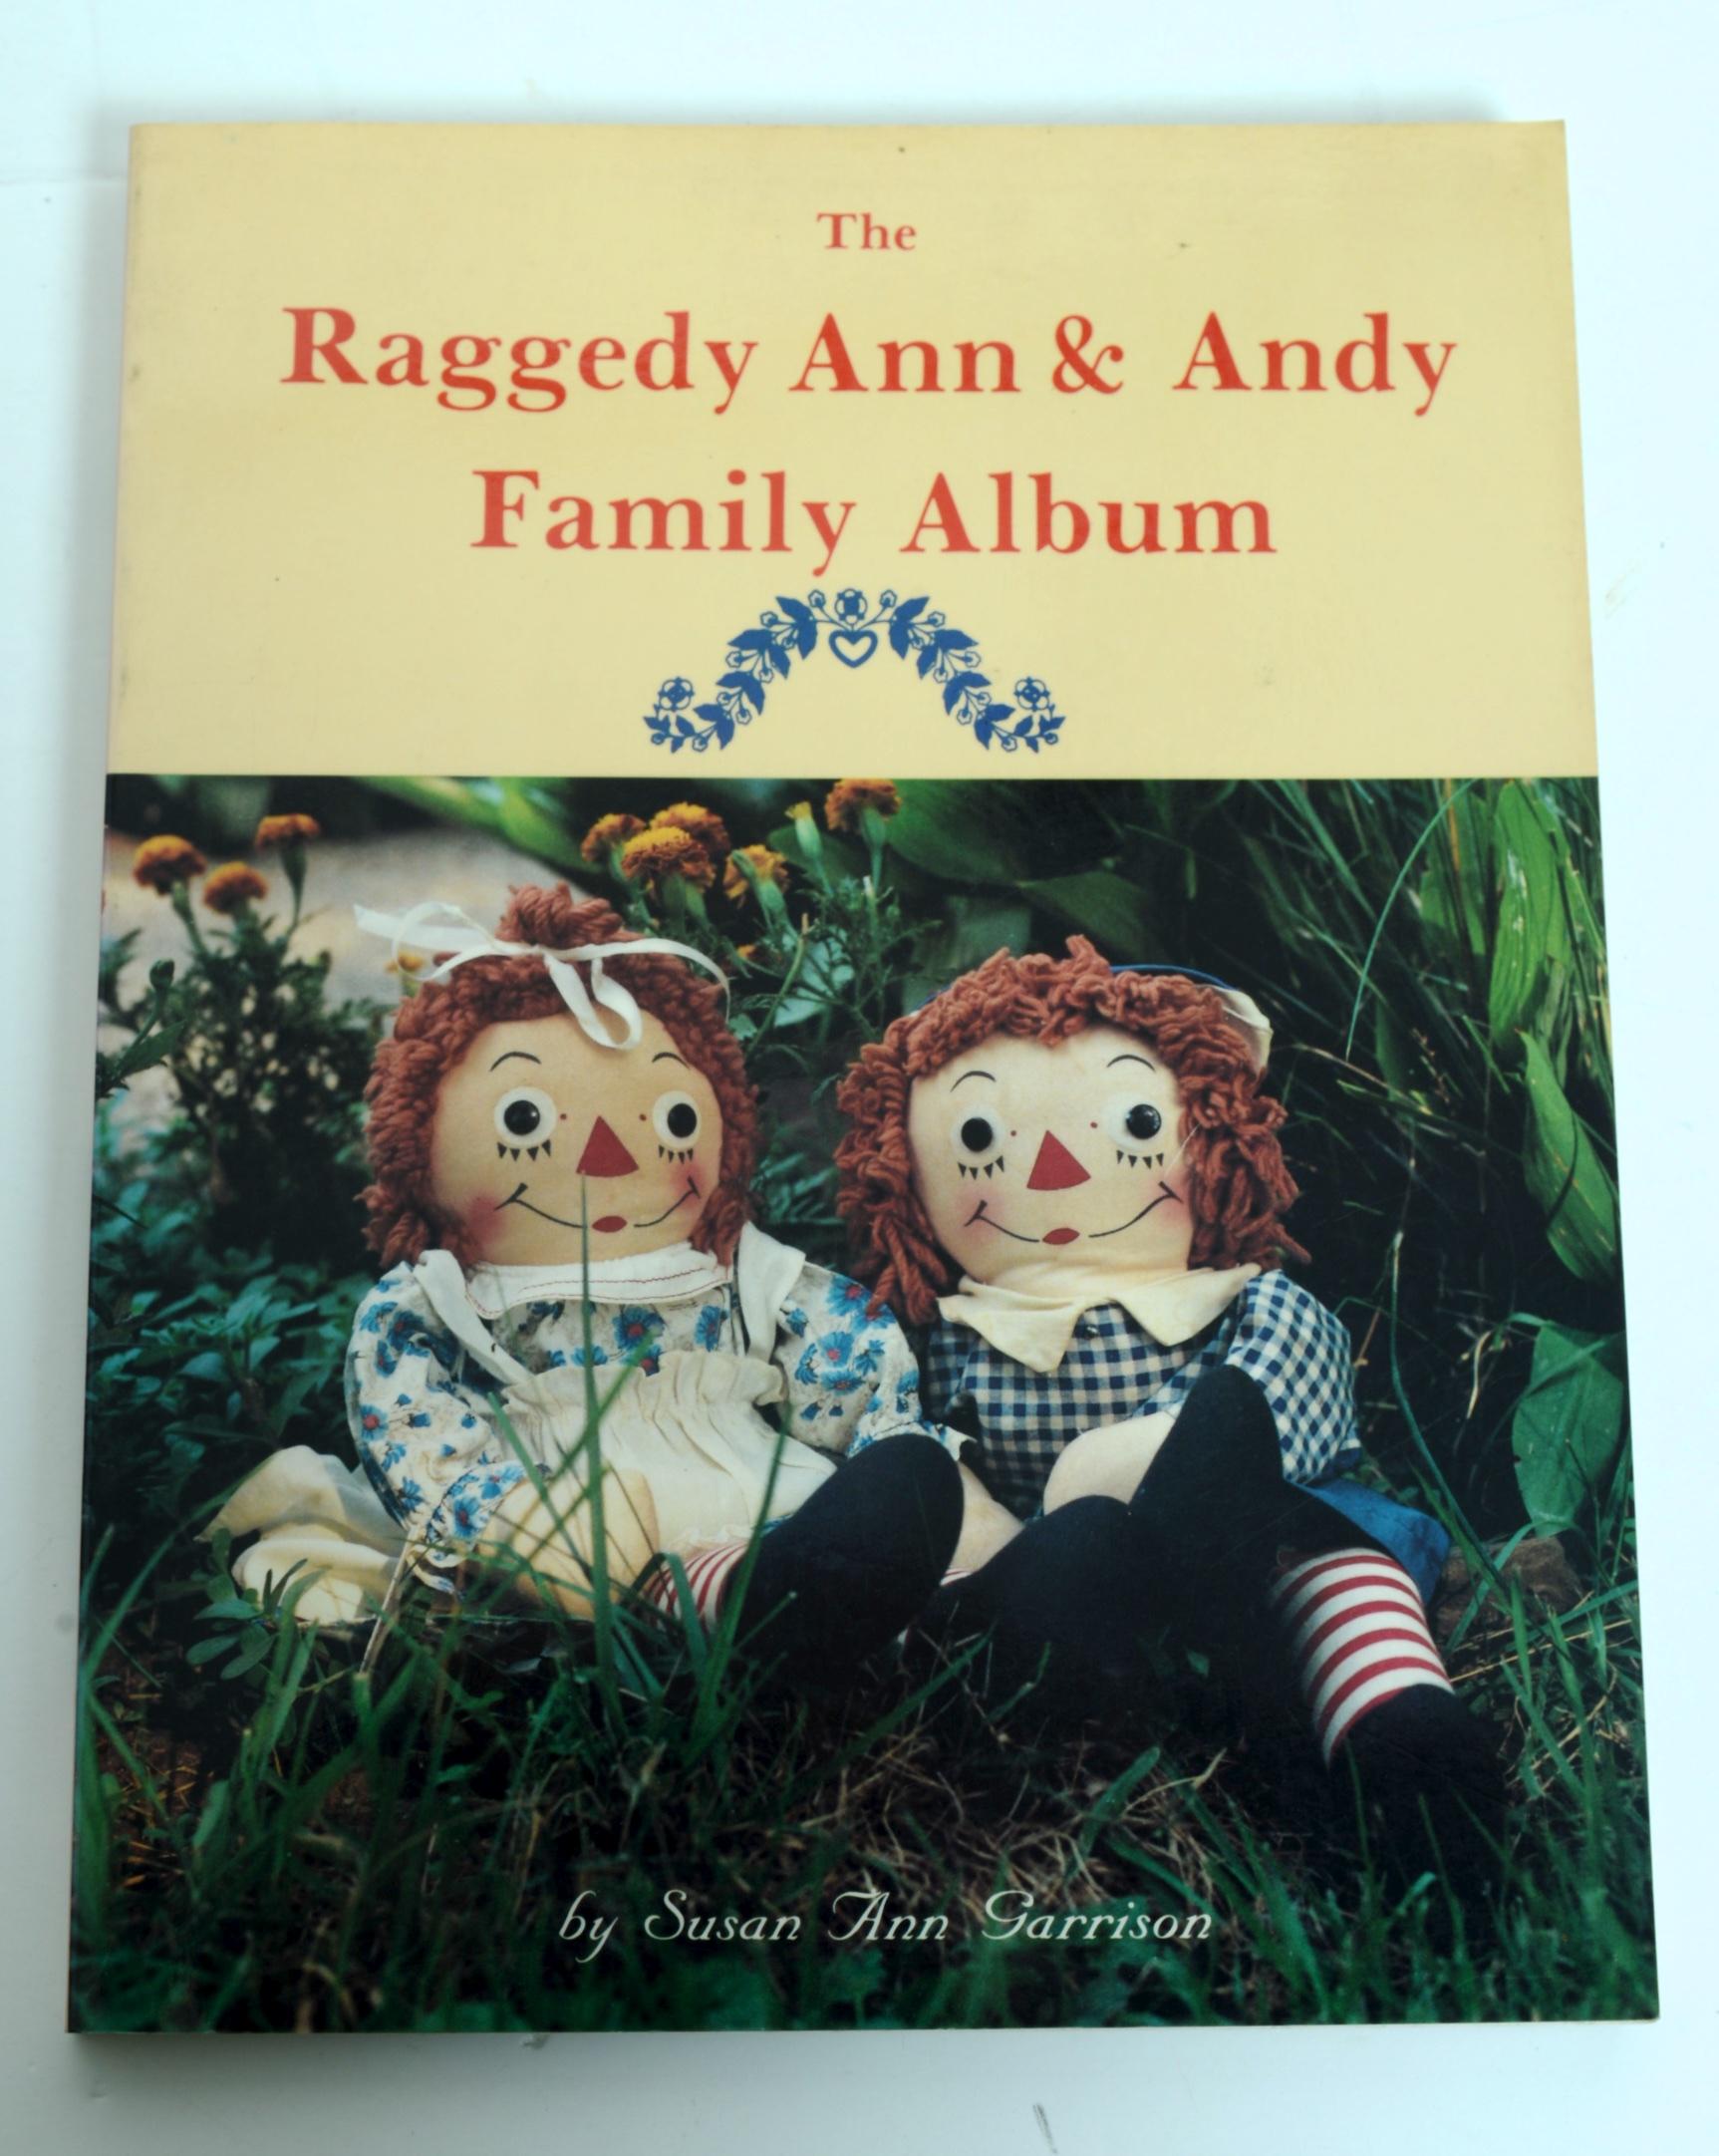 Set of three Raggedy Ann books by Johnny Gruelle along with the Raggedy Ann & Andy Family Album by Susan Garrison. #1. The Raggedy Ann & Andy Family Album, Schiffer Publishing, 1989. 1st Edition softcover (.50